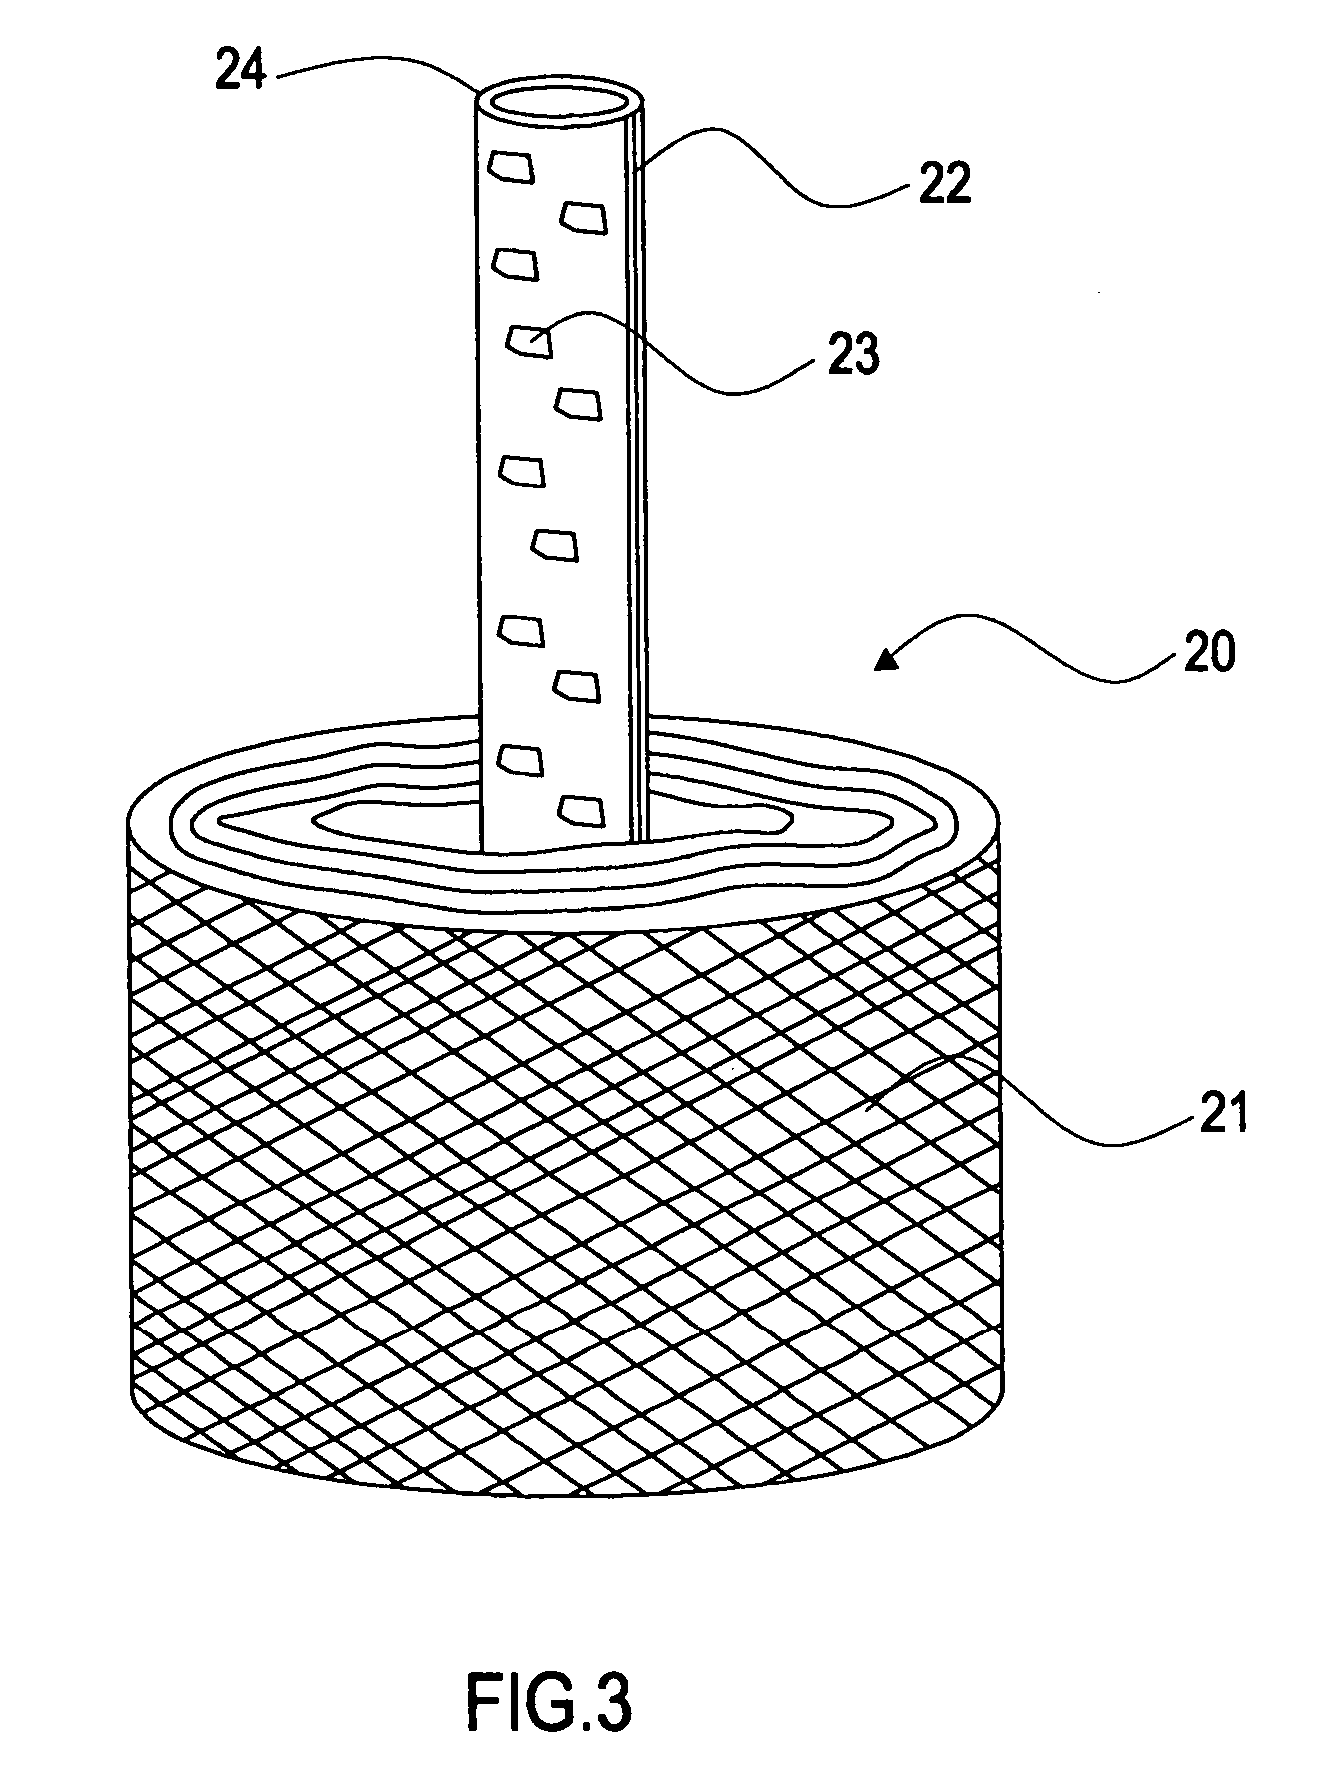 Anti-microbial compositions and methods of making and using the same